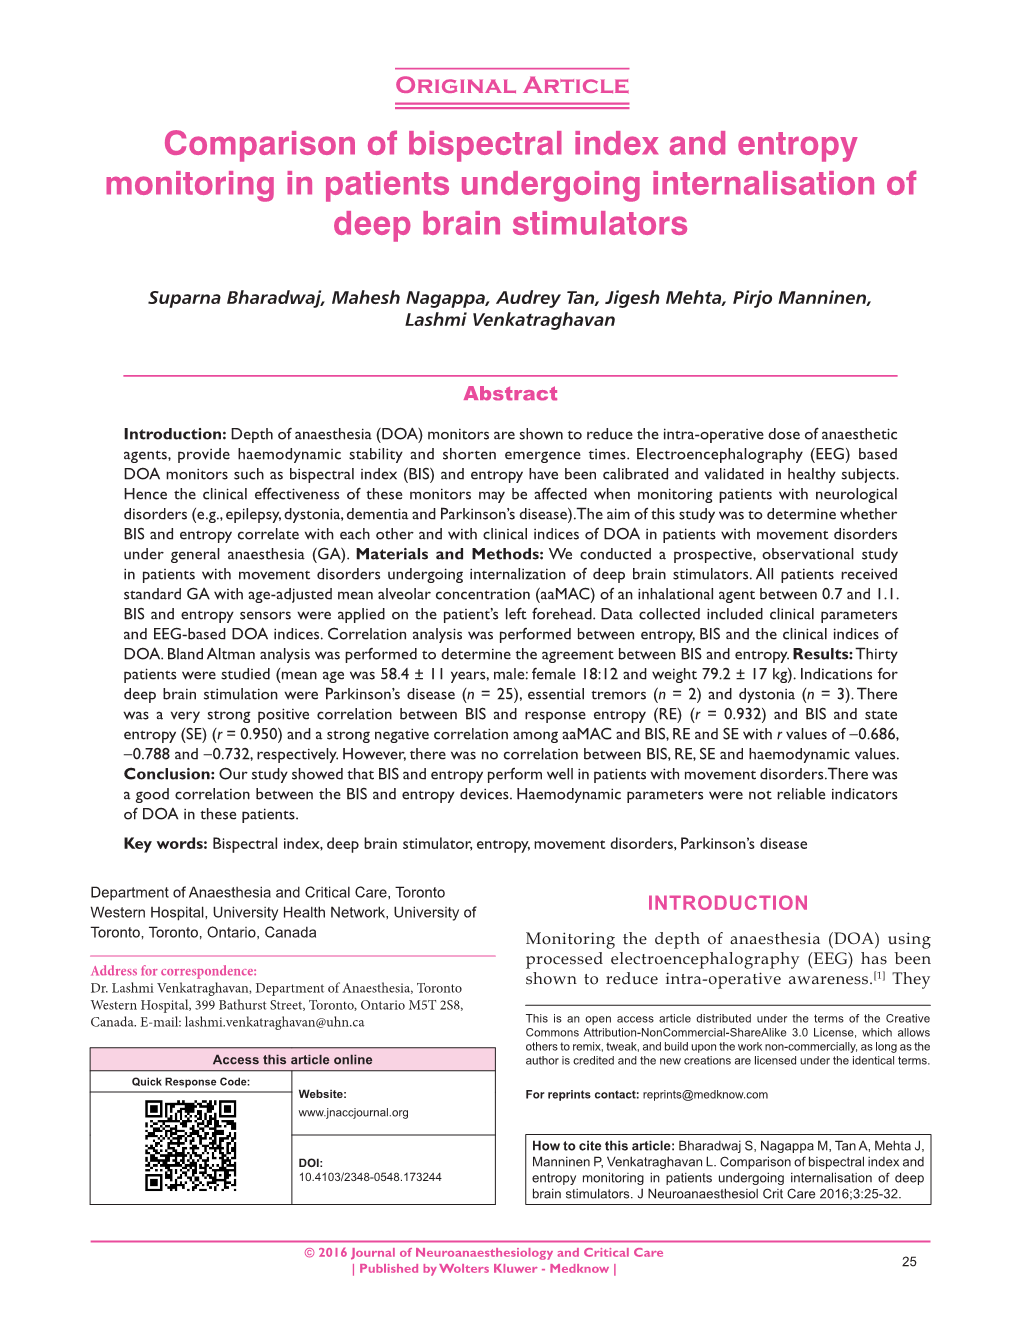 Comparison of Bispectral Index and Entropy Monitoring in Patients Undergoing Internalisation of Deep Brain Stimulators